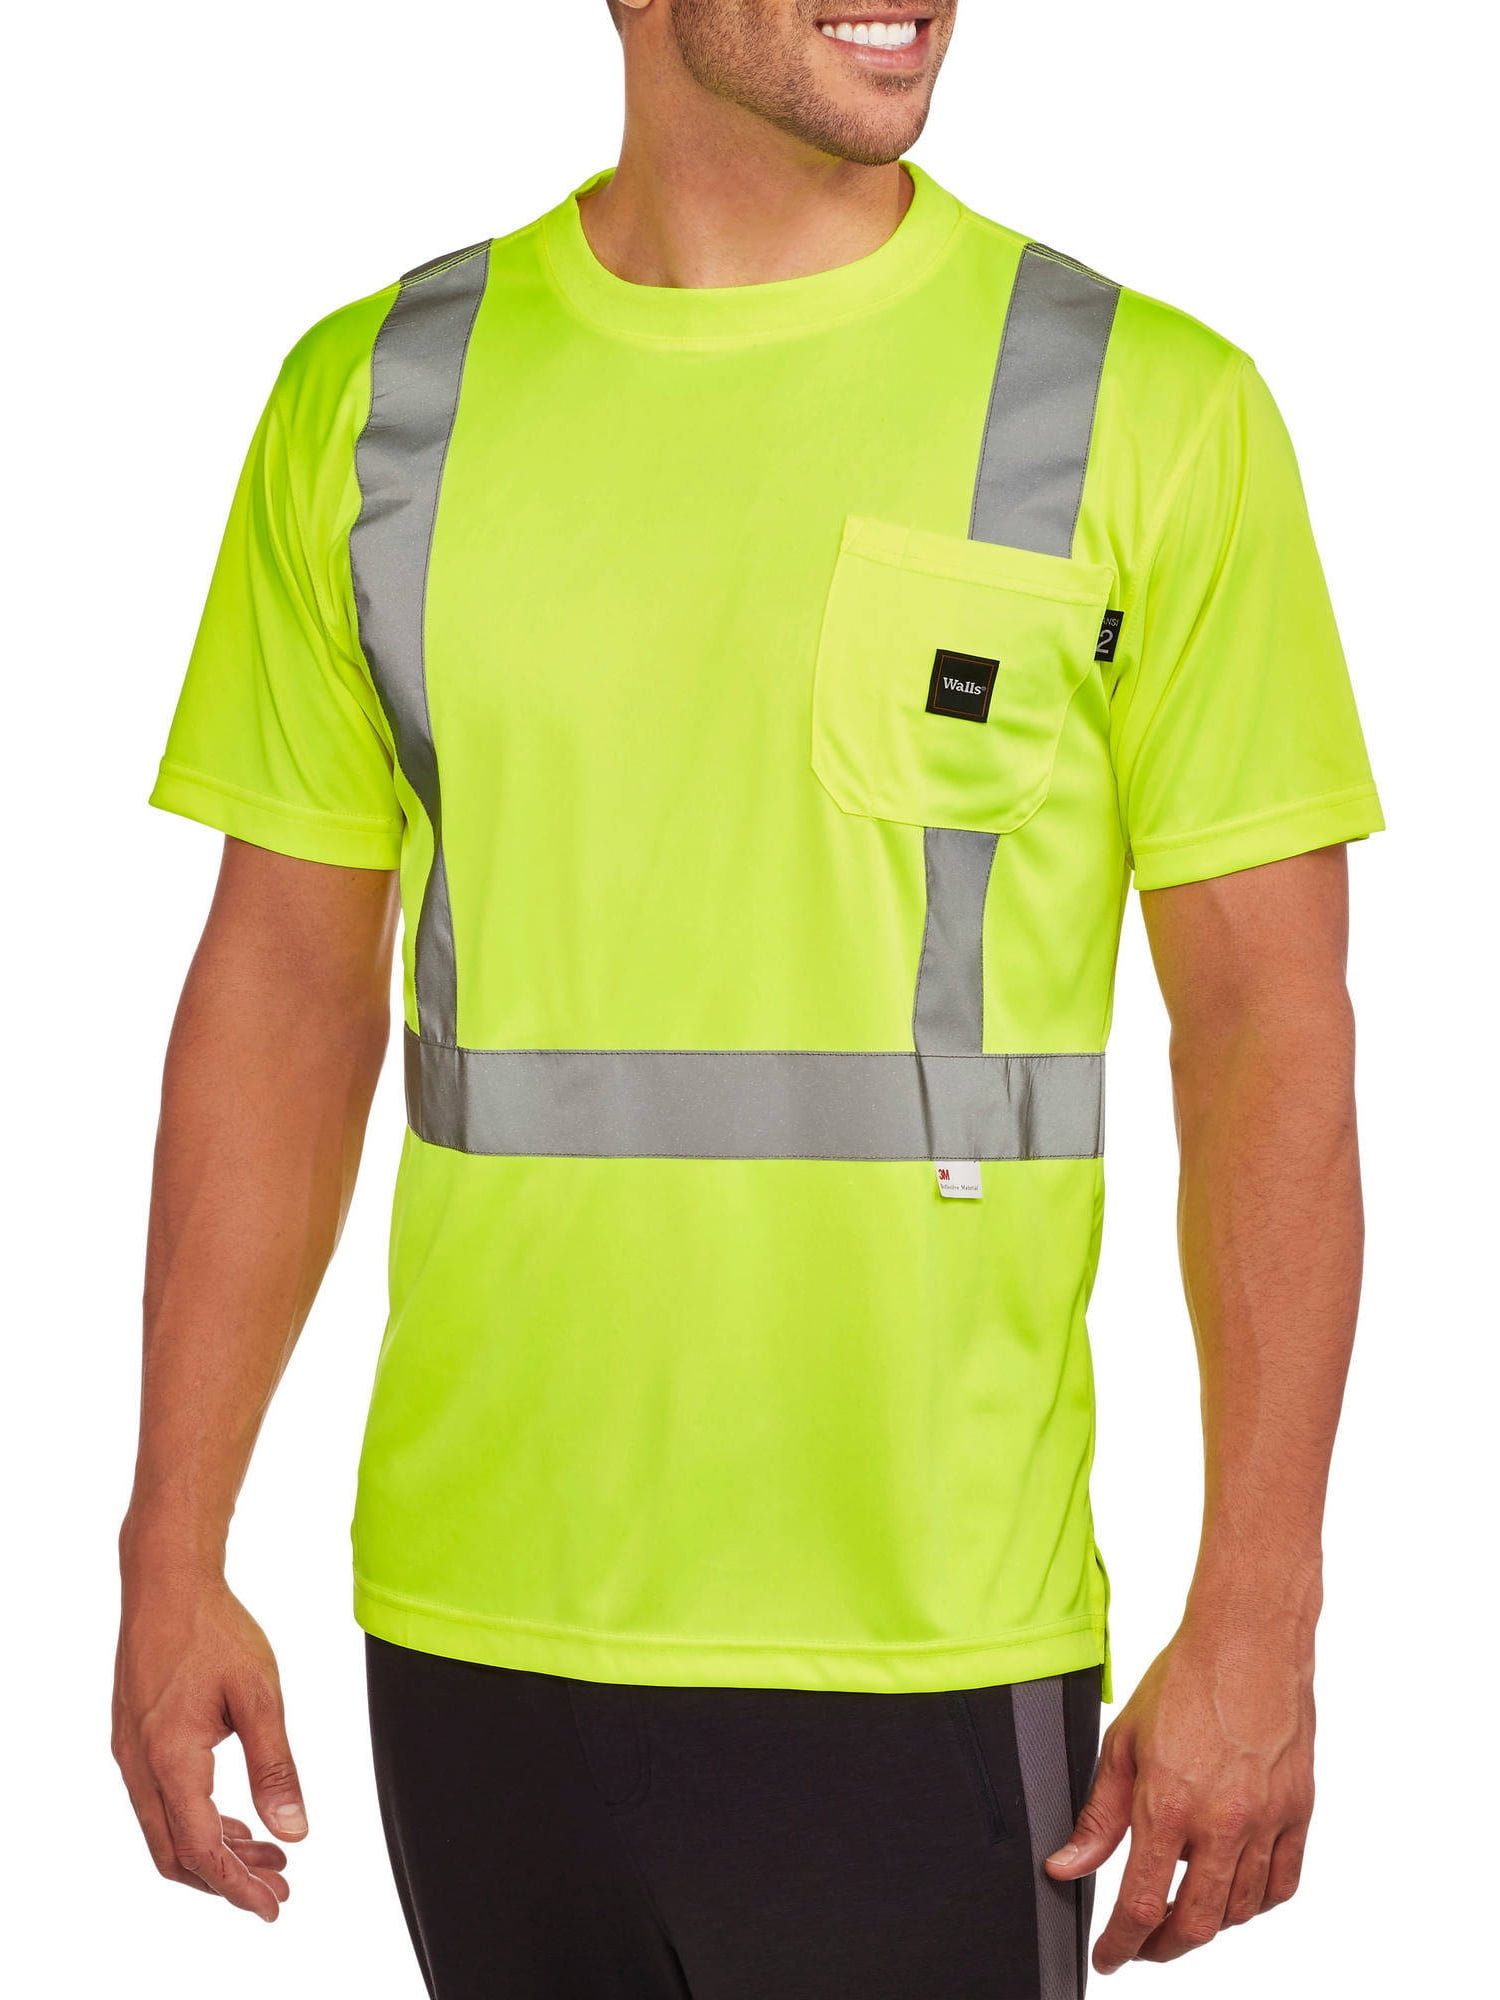 FASHION REVIEW New Mens Hi Vis Visibility Short Sleeve Safety Work Crew Neck Summer T Shirt